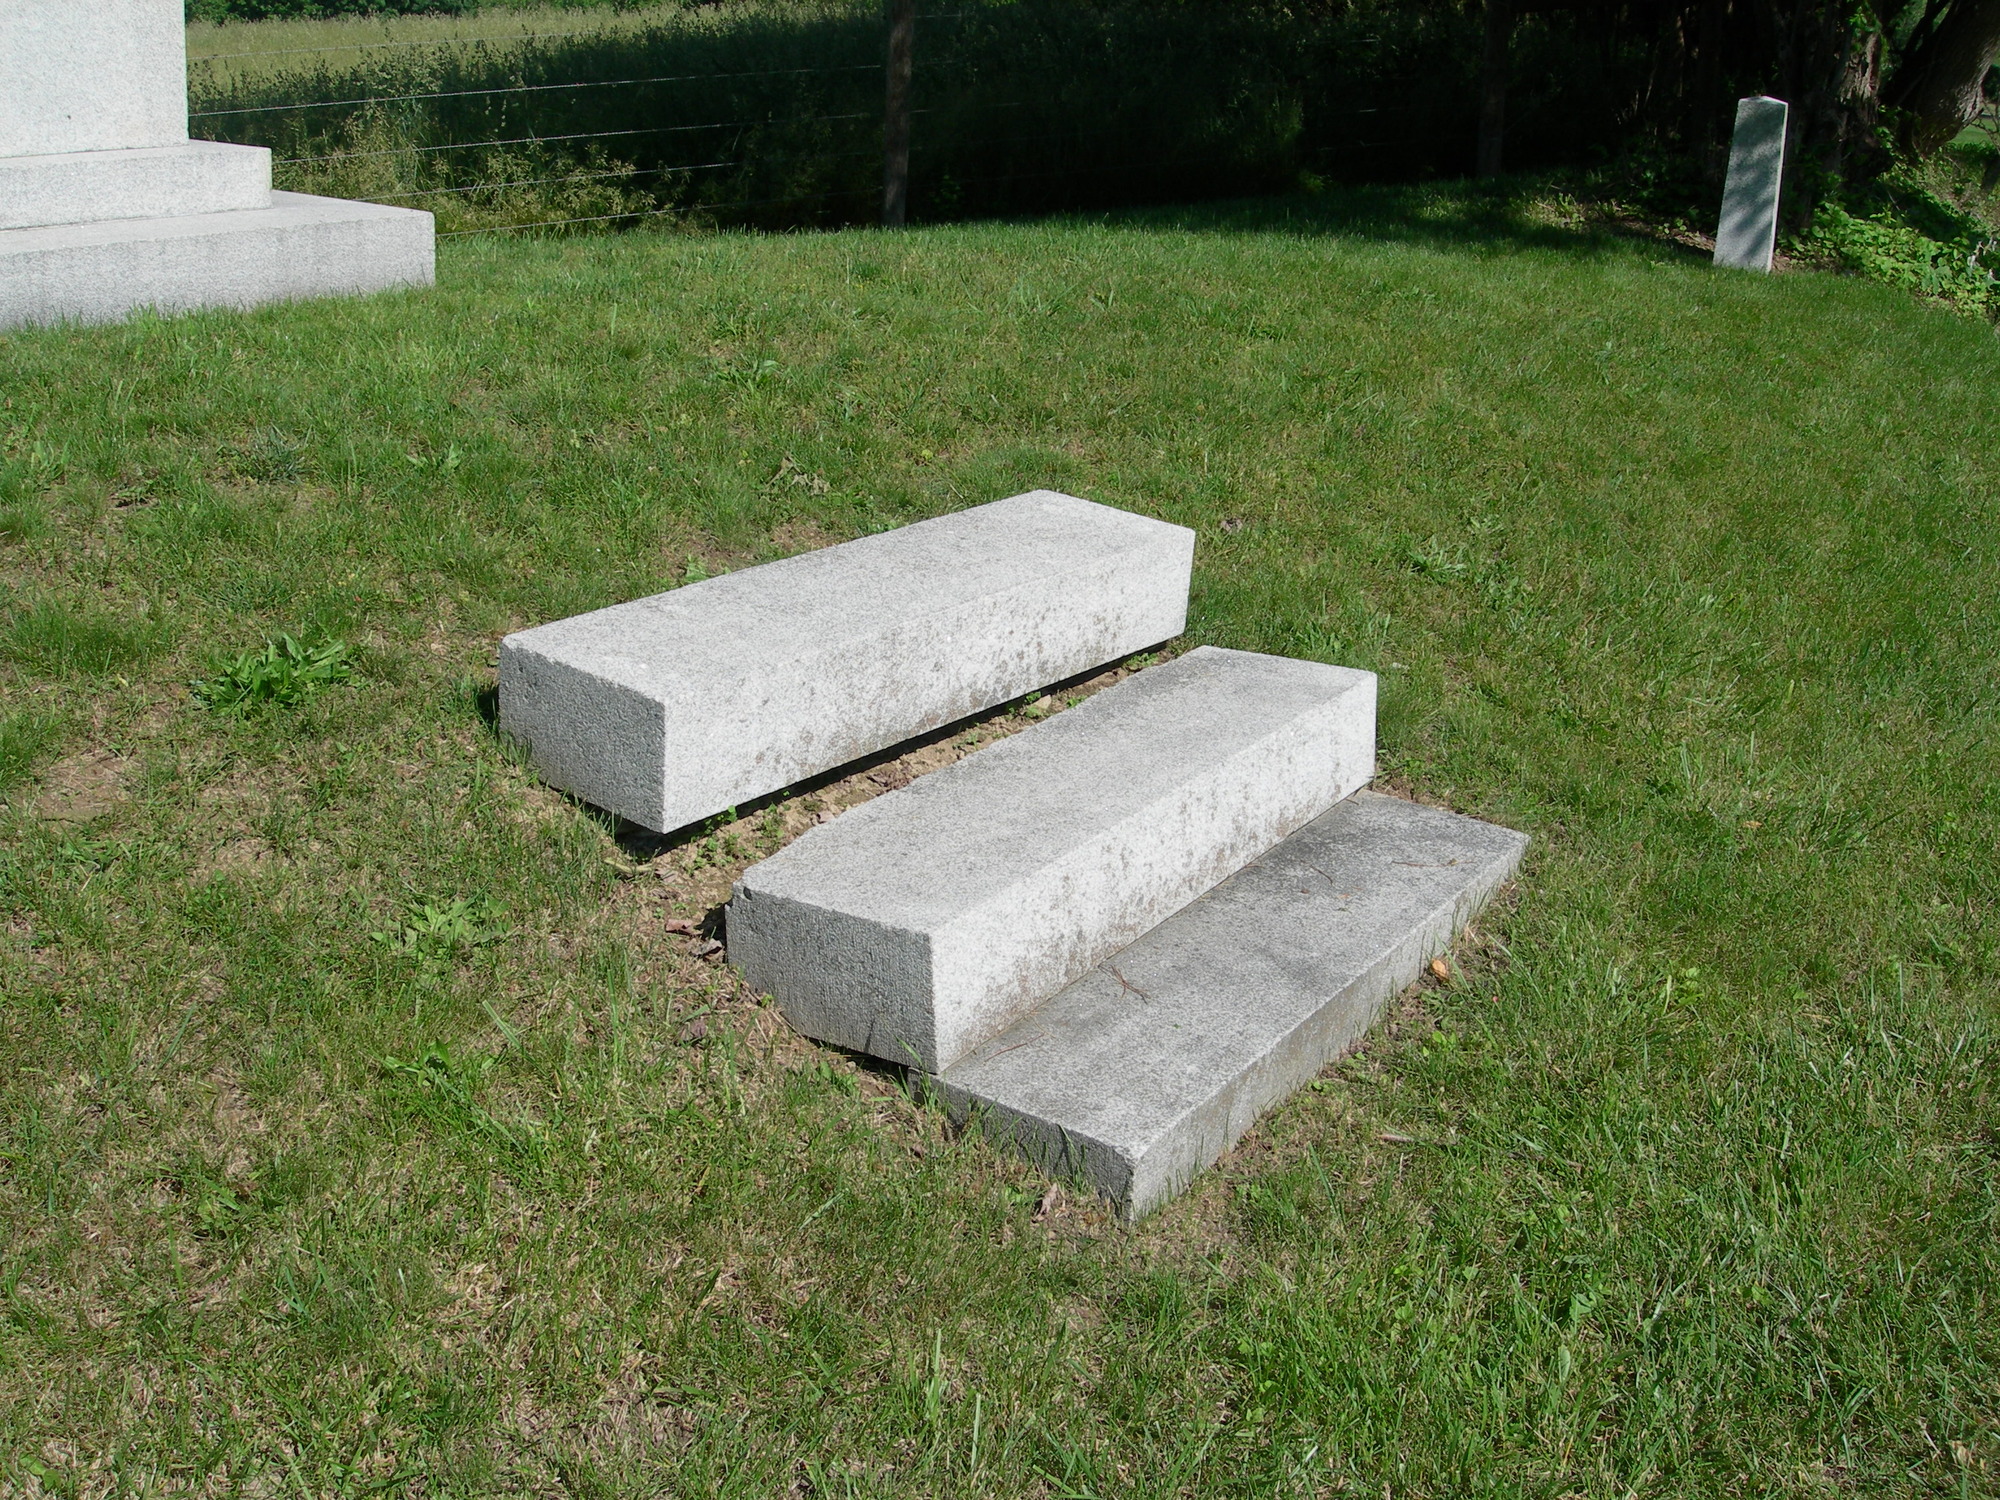 Three granite steps sit in a small hillside. The top step is separated by several inches from the lower two steps and grass is visible between them.